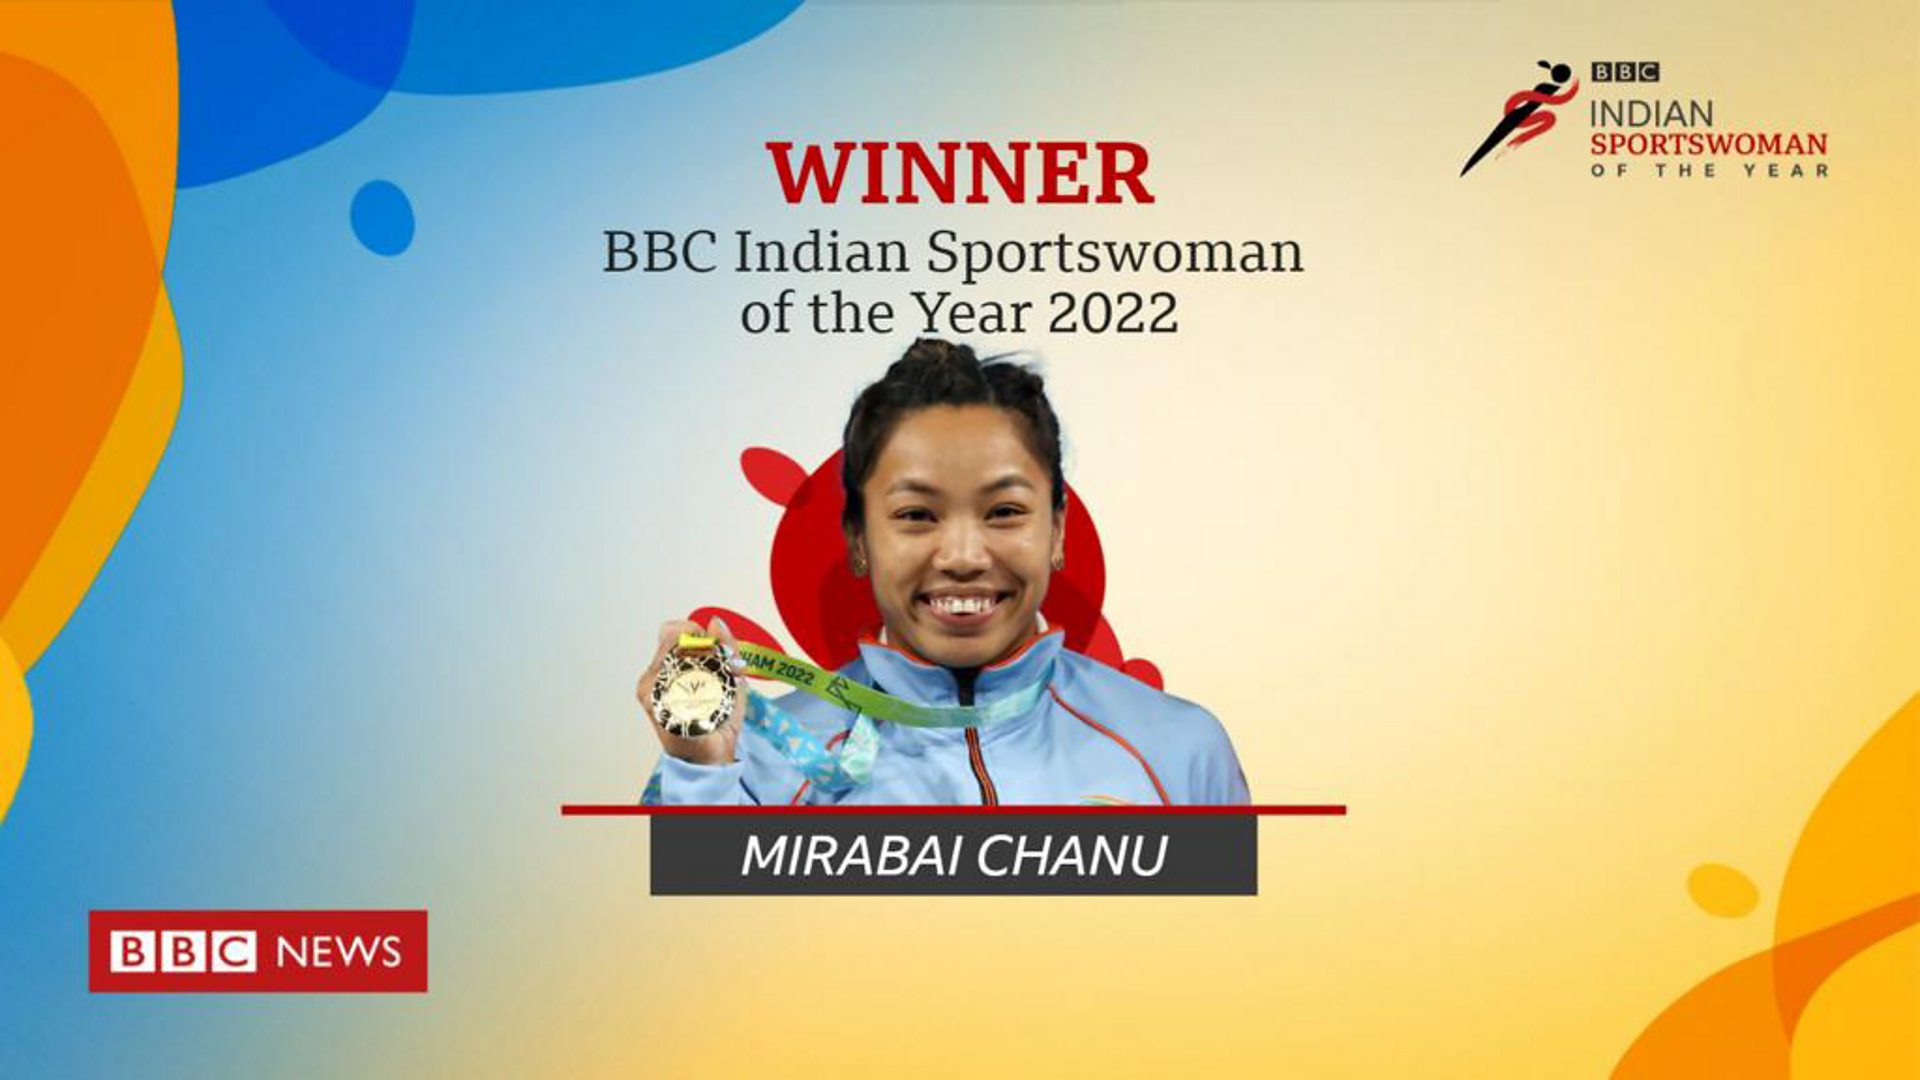 Mirabai Chanu wins BBC Indian Sportswoman Of The Year for second year running